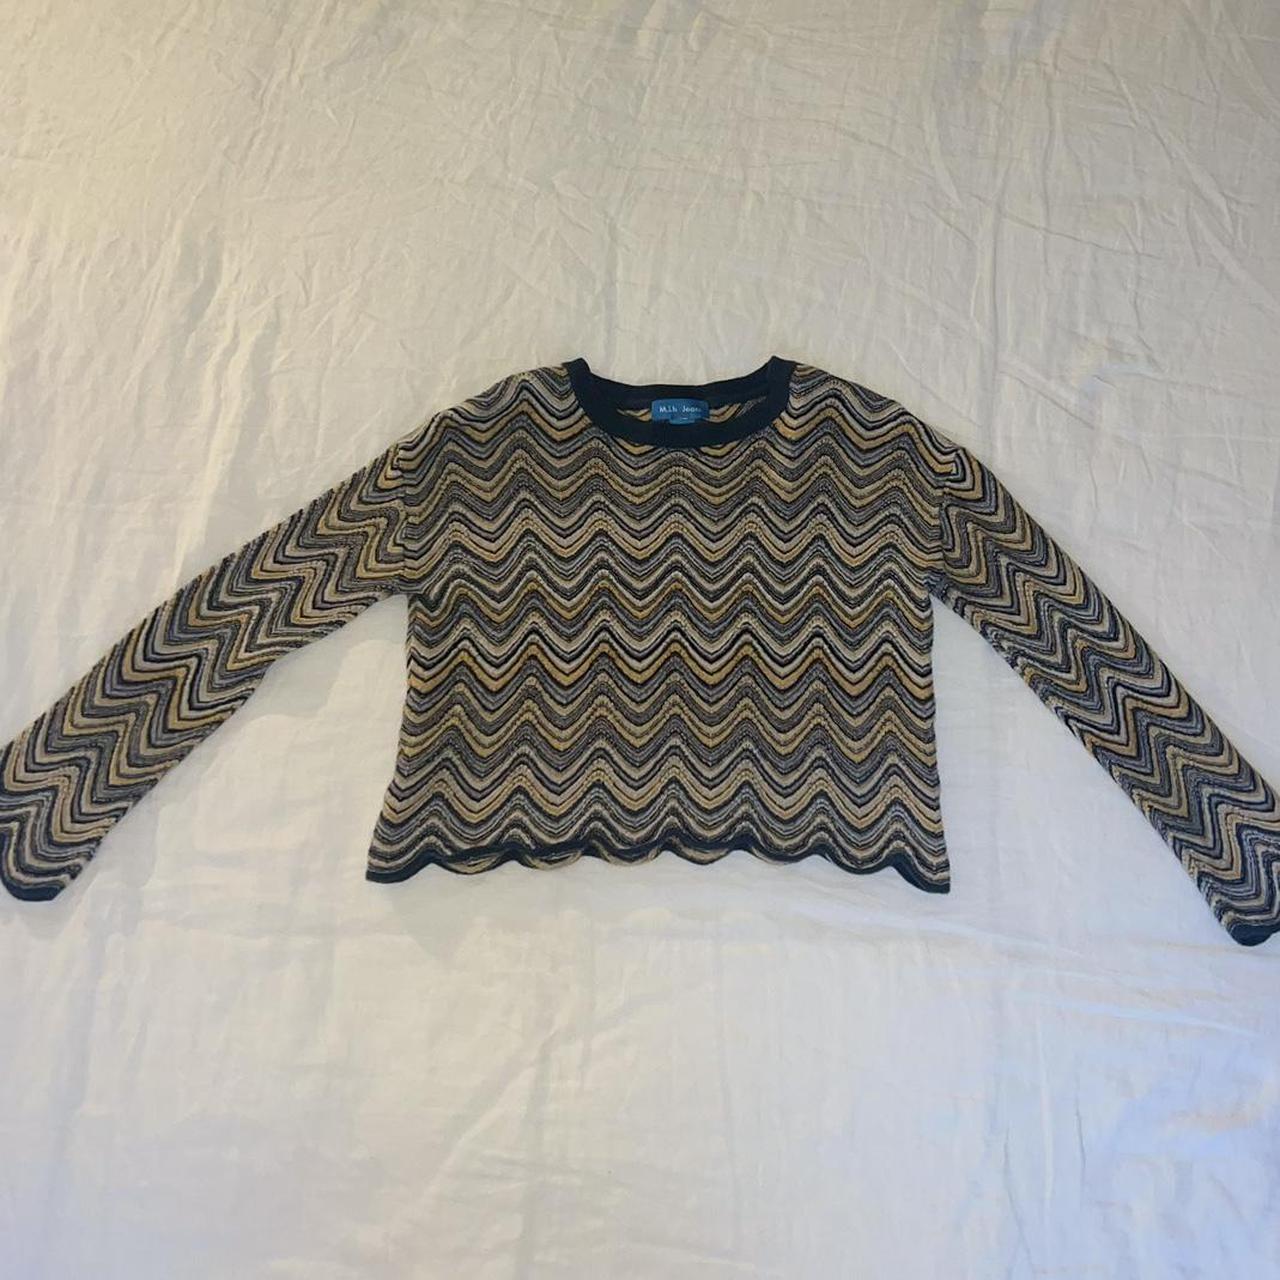 item listed by secondhand_stash